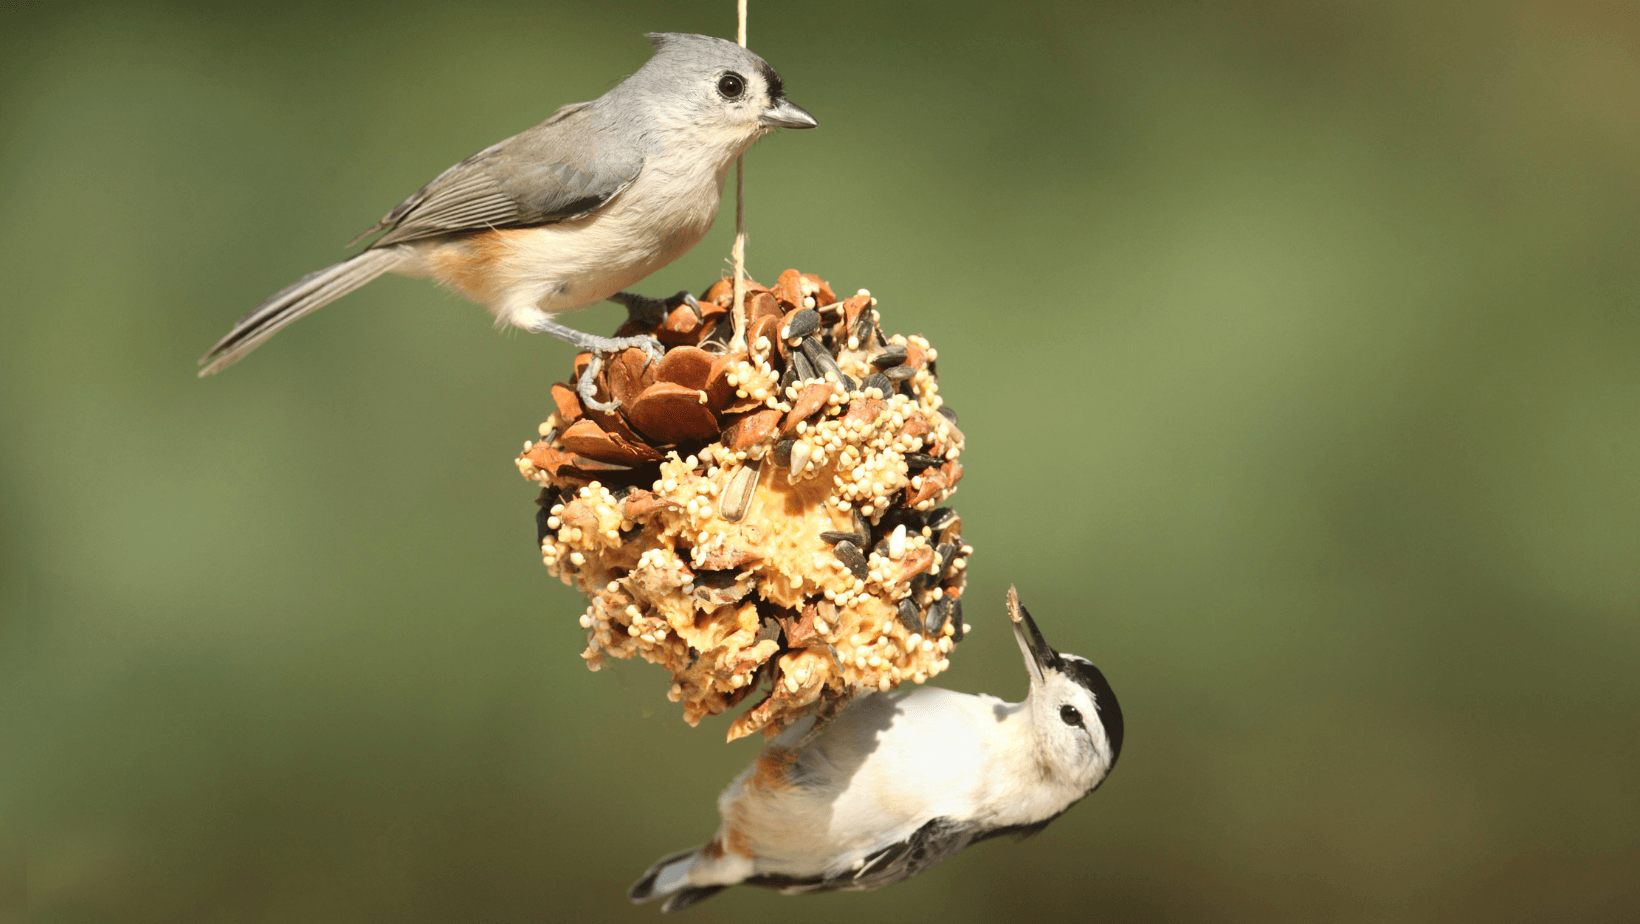 two birds eat from a pinecone bird feeder